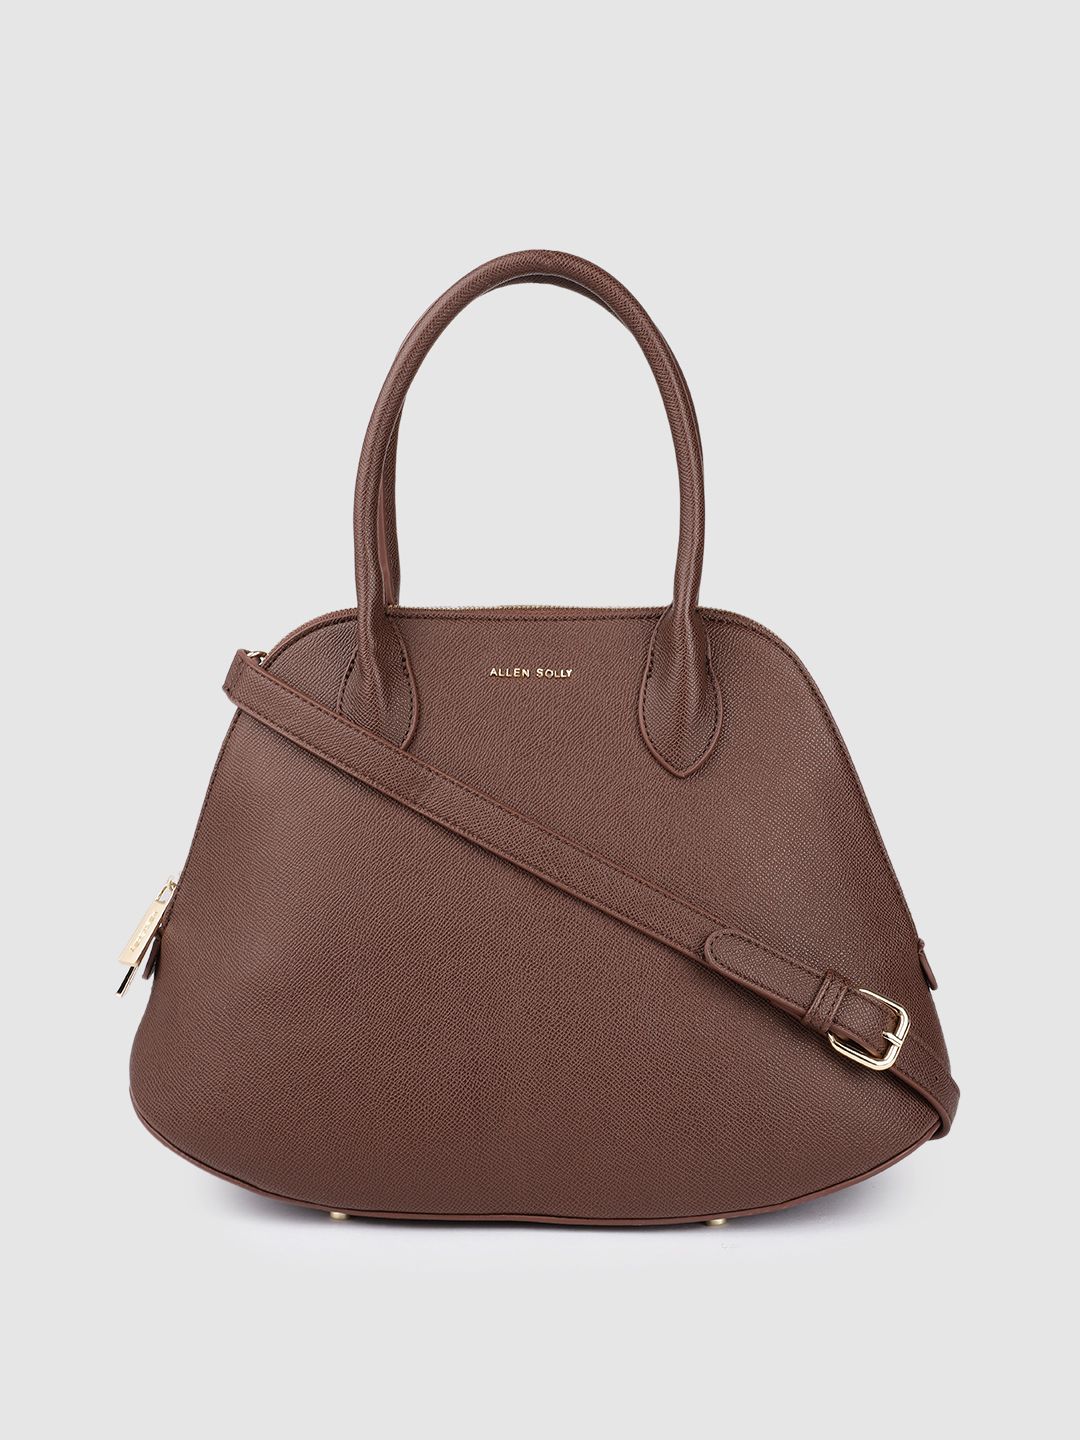 Allen Solly Brown Solid Structured Handheld Bag Price in India